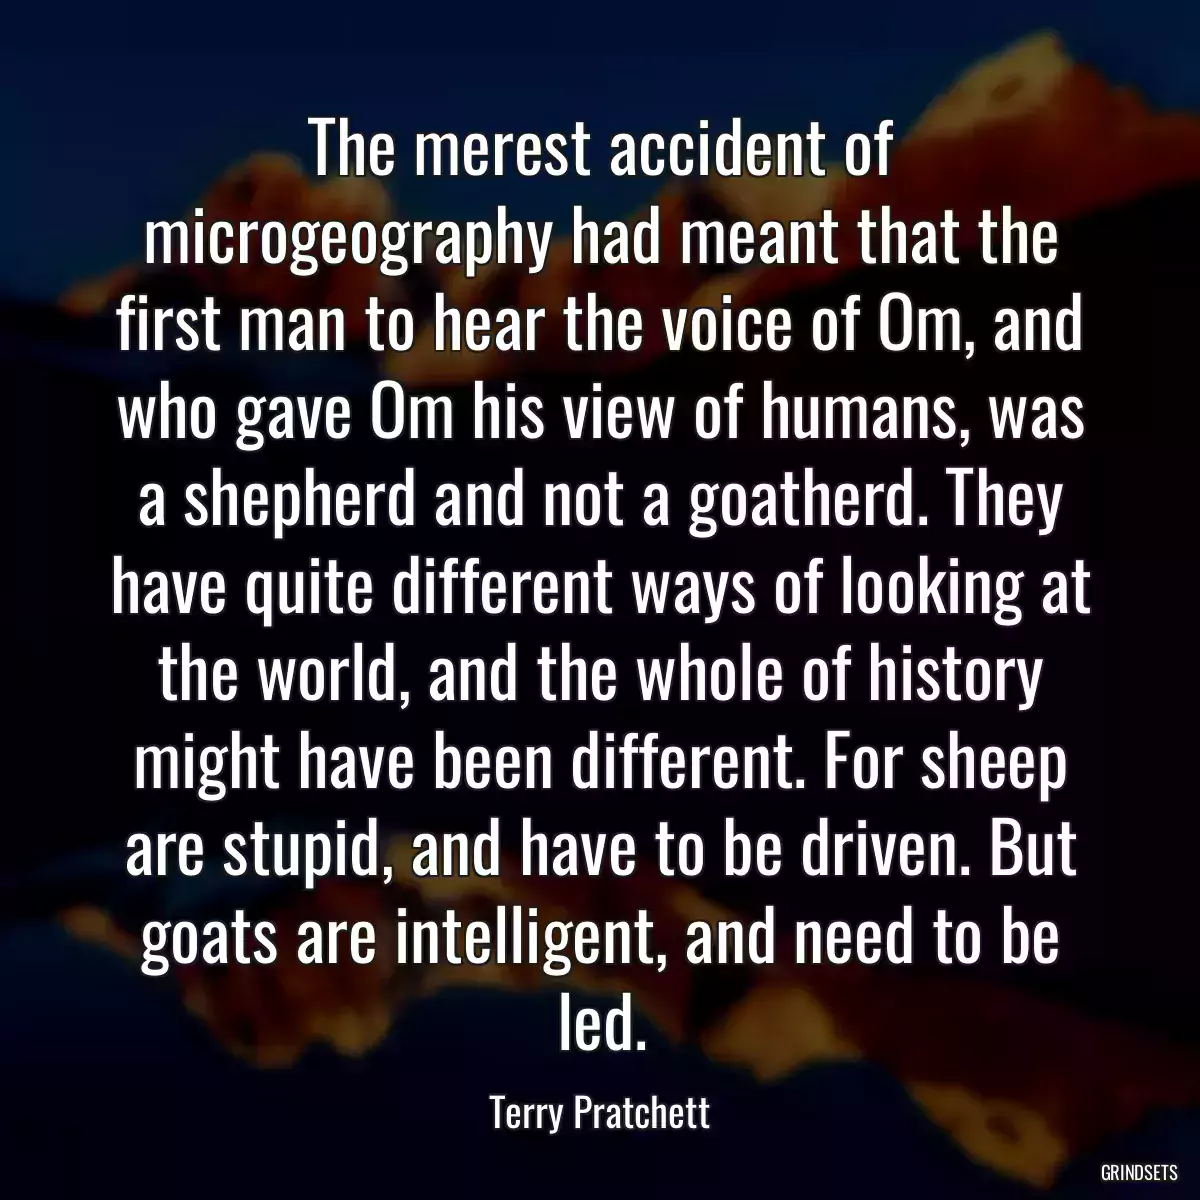 The merest accident of microgeography had meant that the first man to hear the voice of Om, and who gave Om his view of humans, was a shepherd and not a goatherd. They have quite different ways of looking at the world, and the whole of history might have been different. For sheep are stupid, and have to be driven. But goats are intelligent, and need to be led.